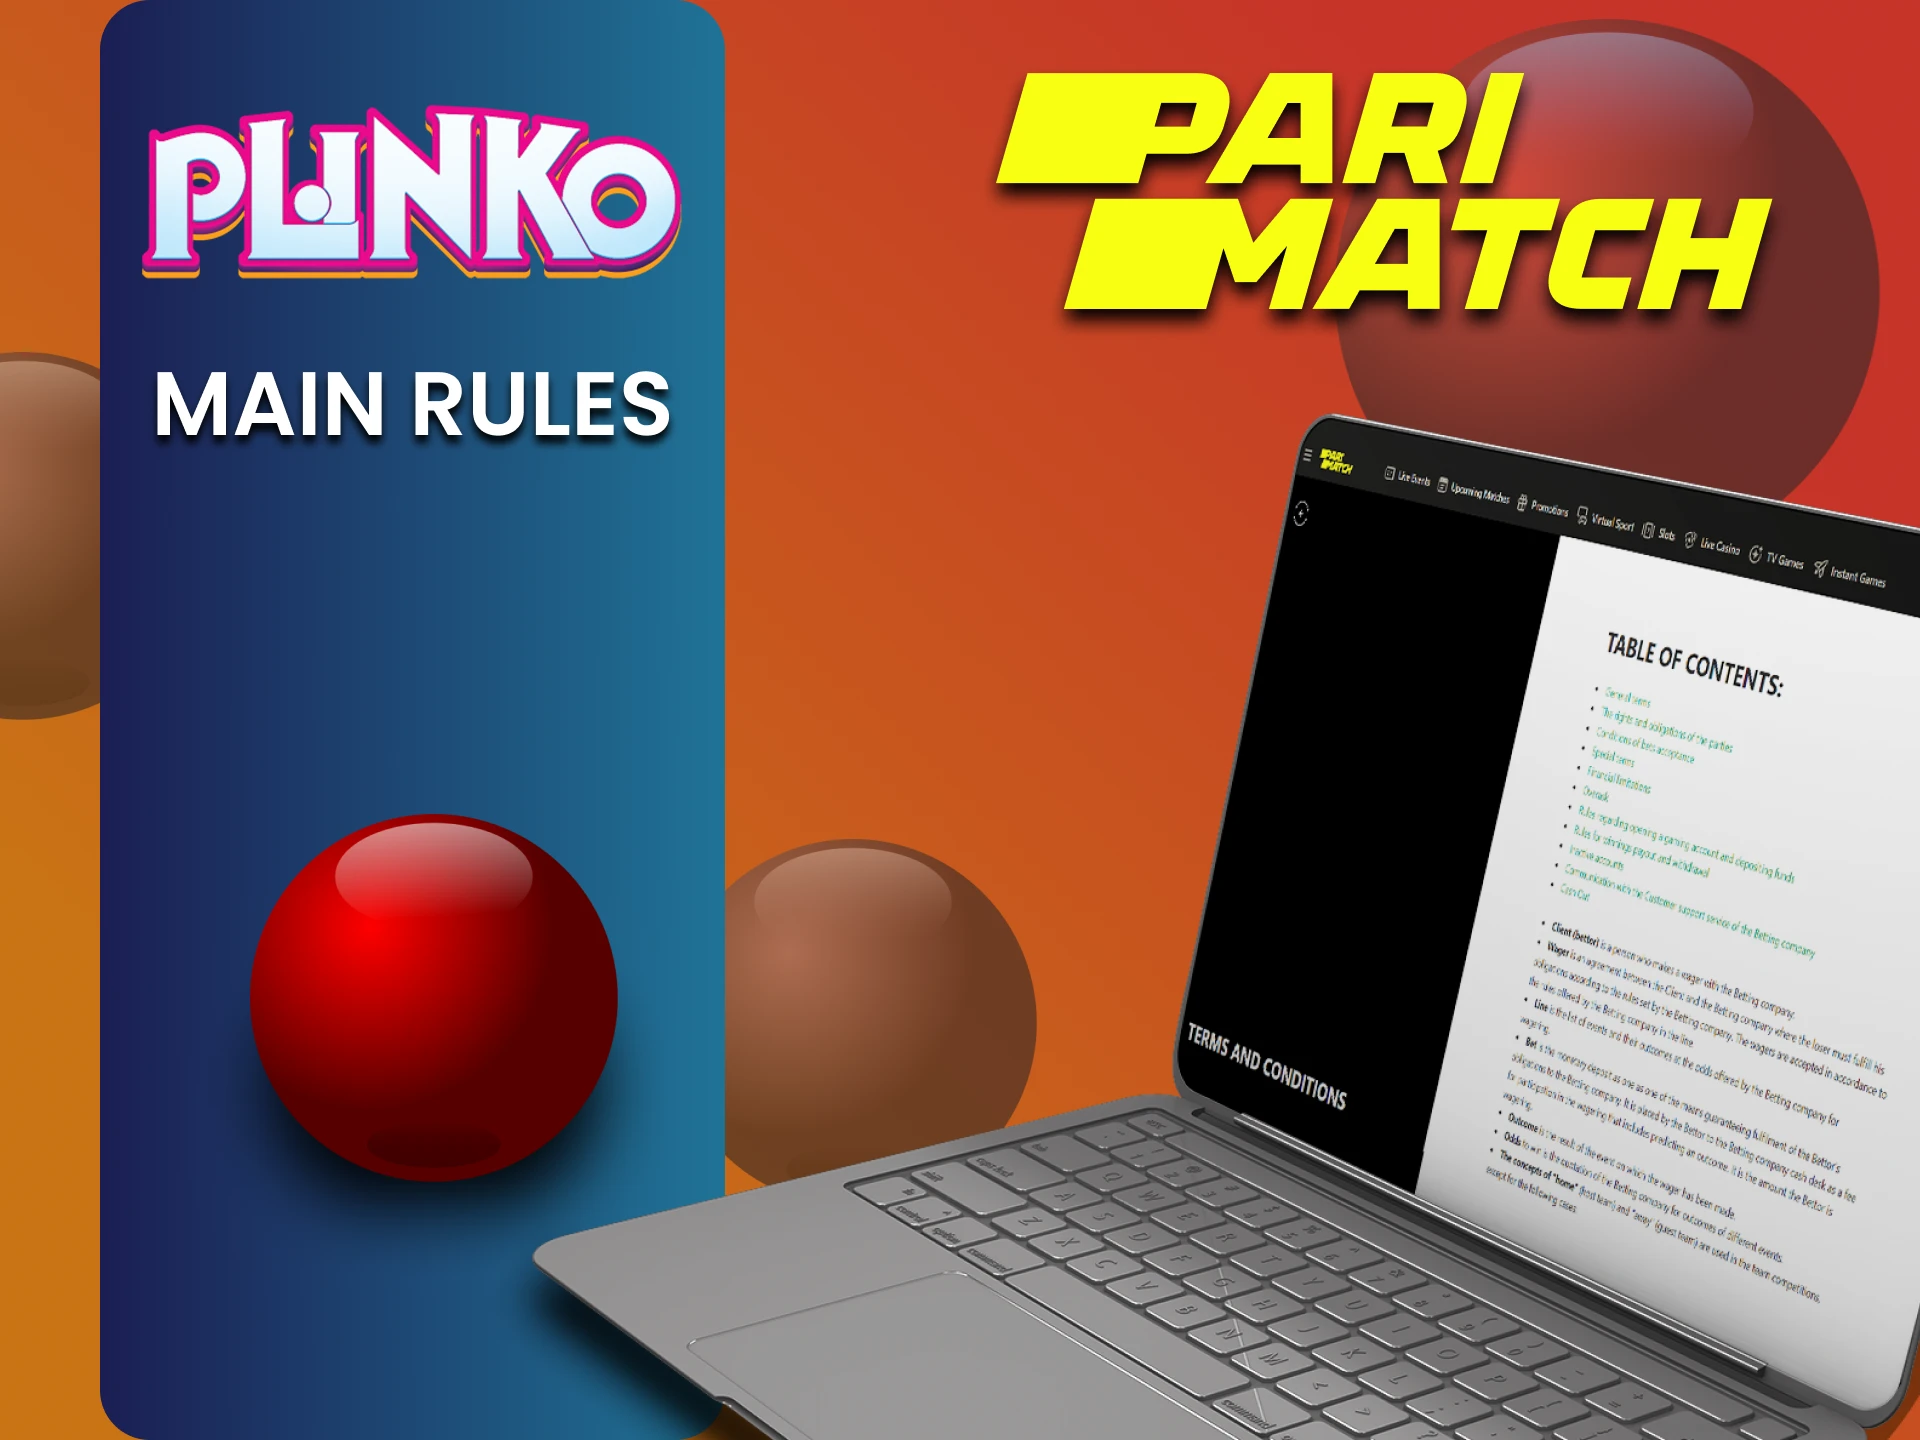 Find out about the rules of the Parimatch service for Plinko.